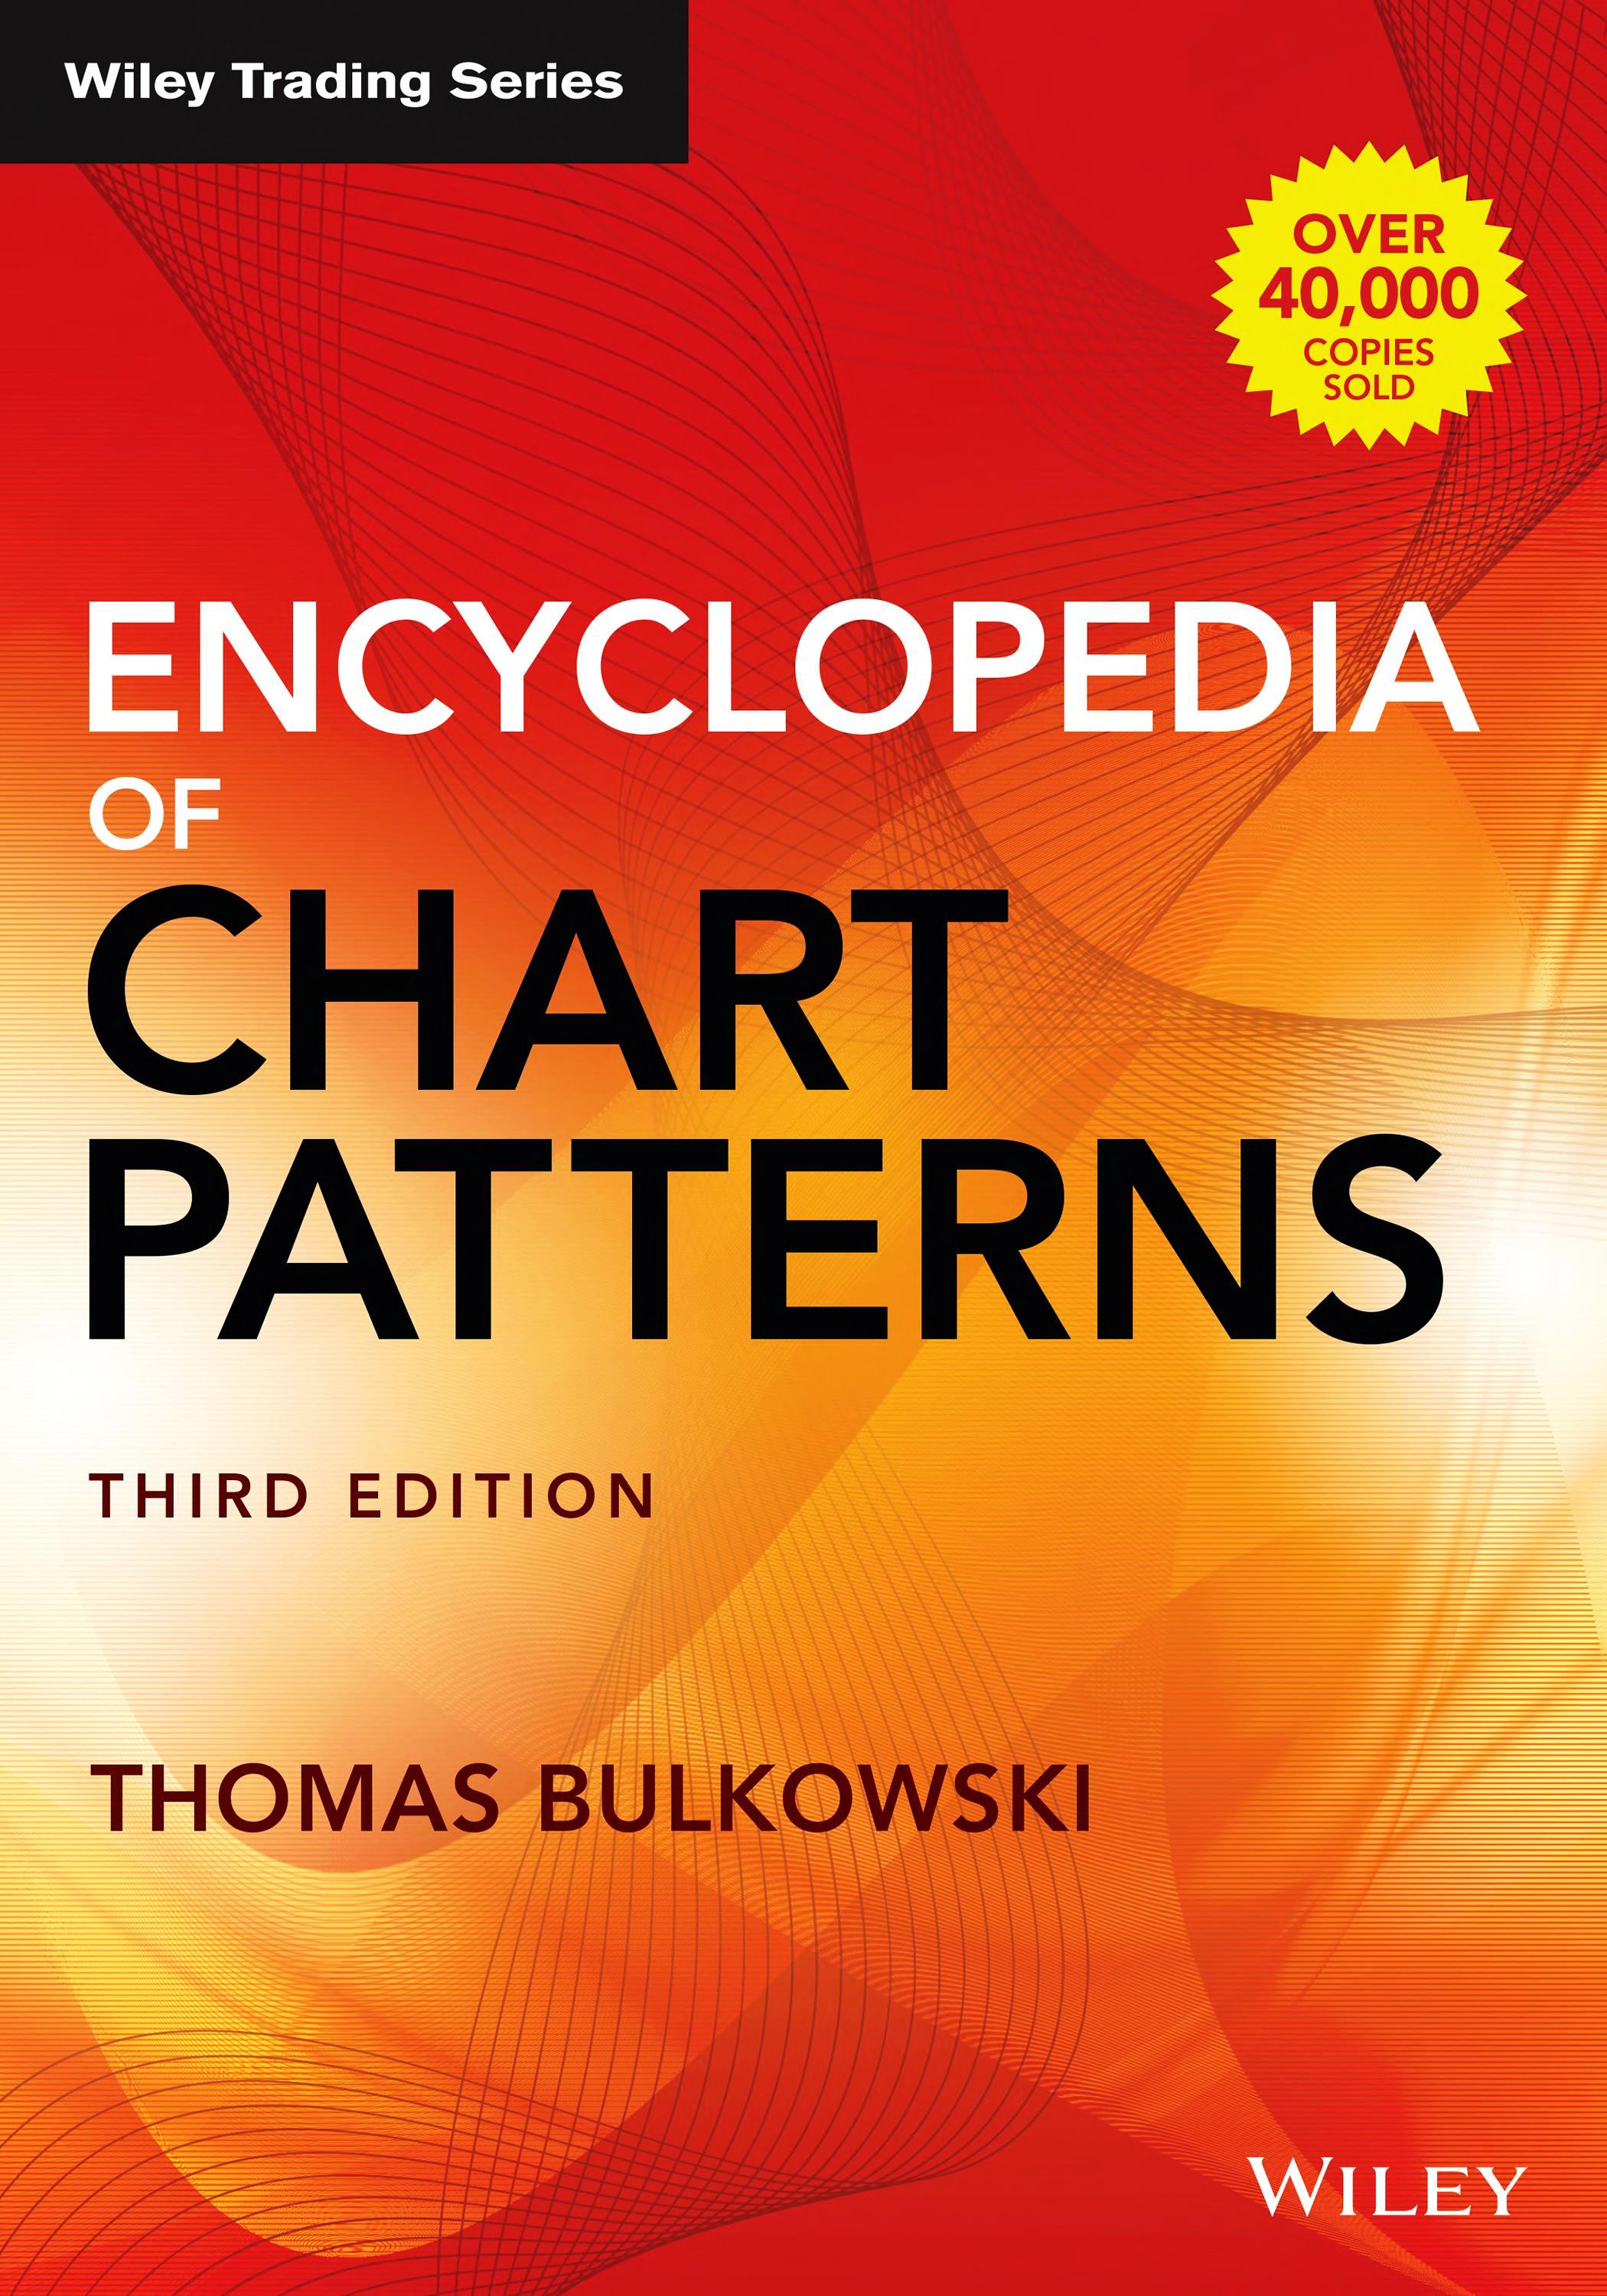 Encyclopedia of Chart Patterns: 225 book free download